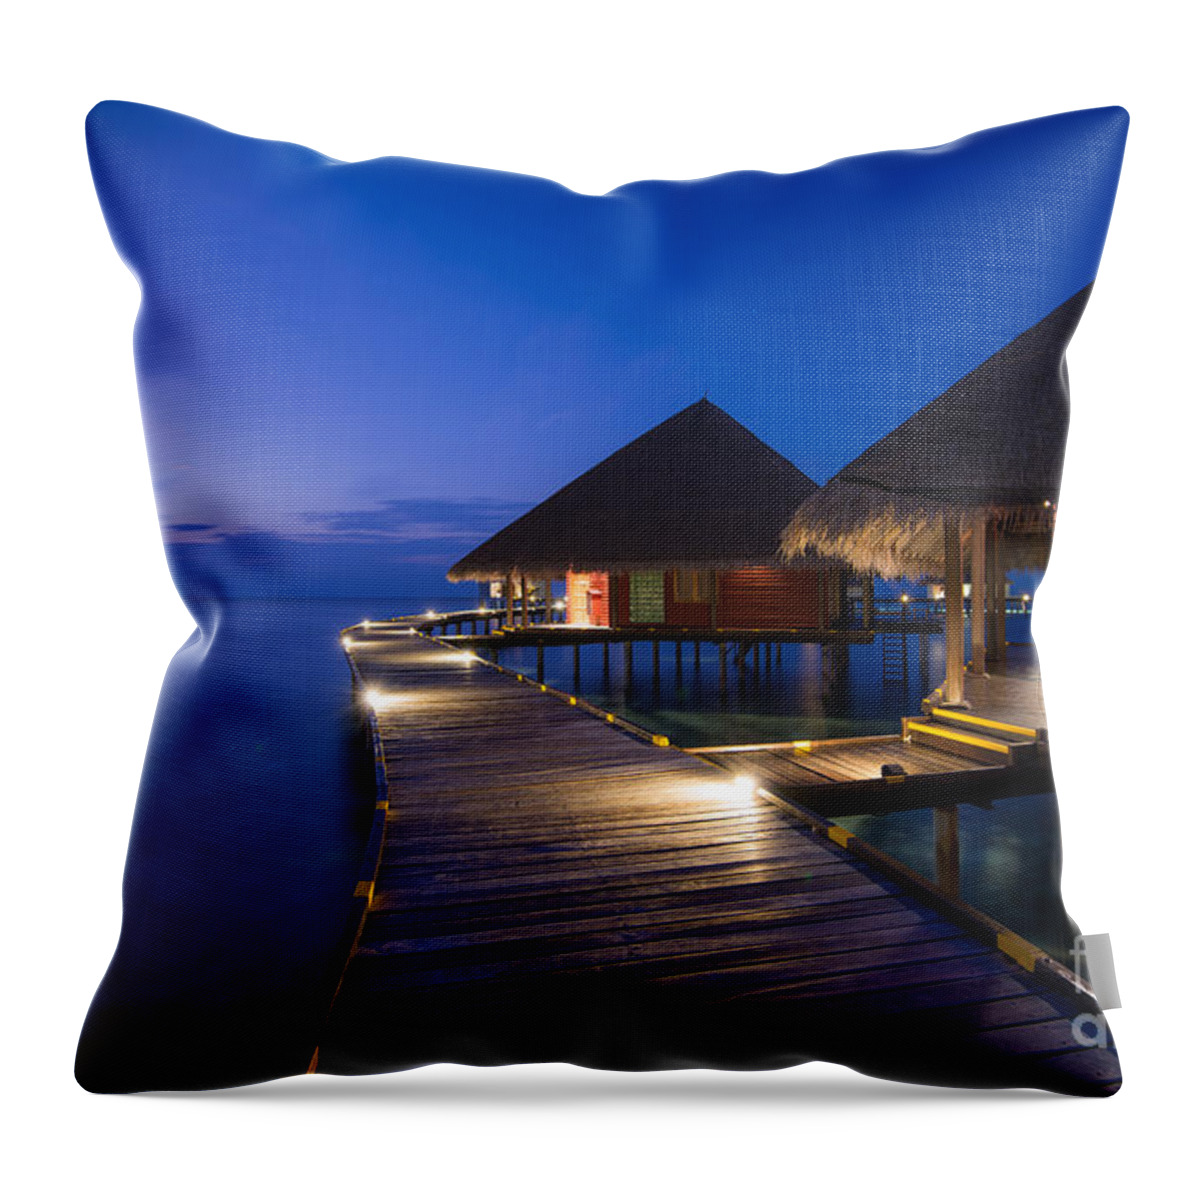 Maldives Throw Pillow featuring the photograph The Night Awakes by Hannes Cmarits